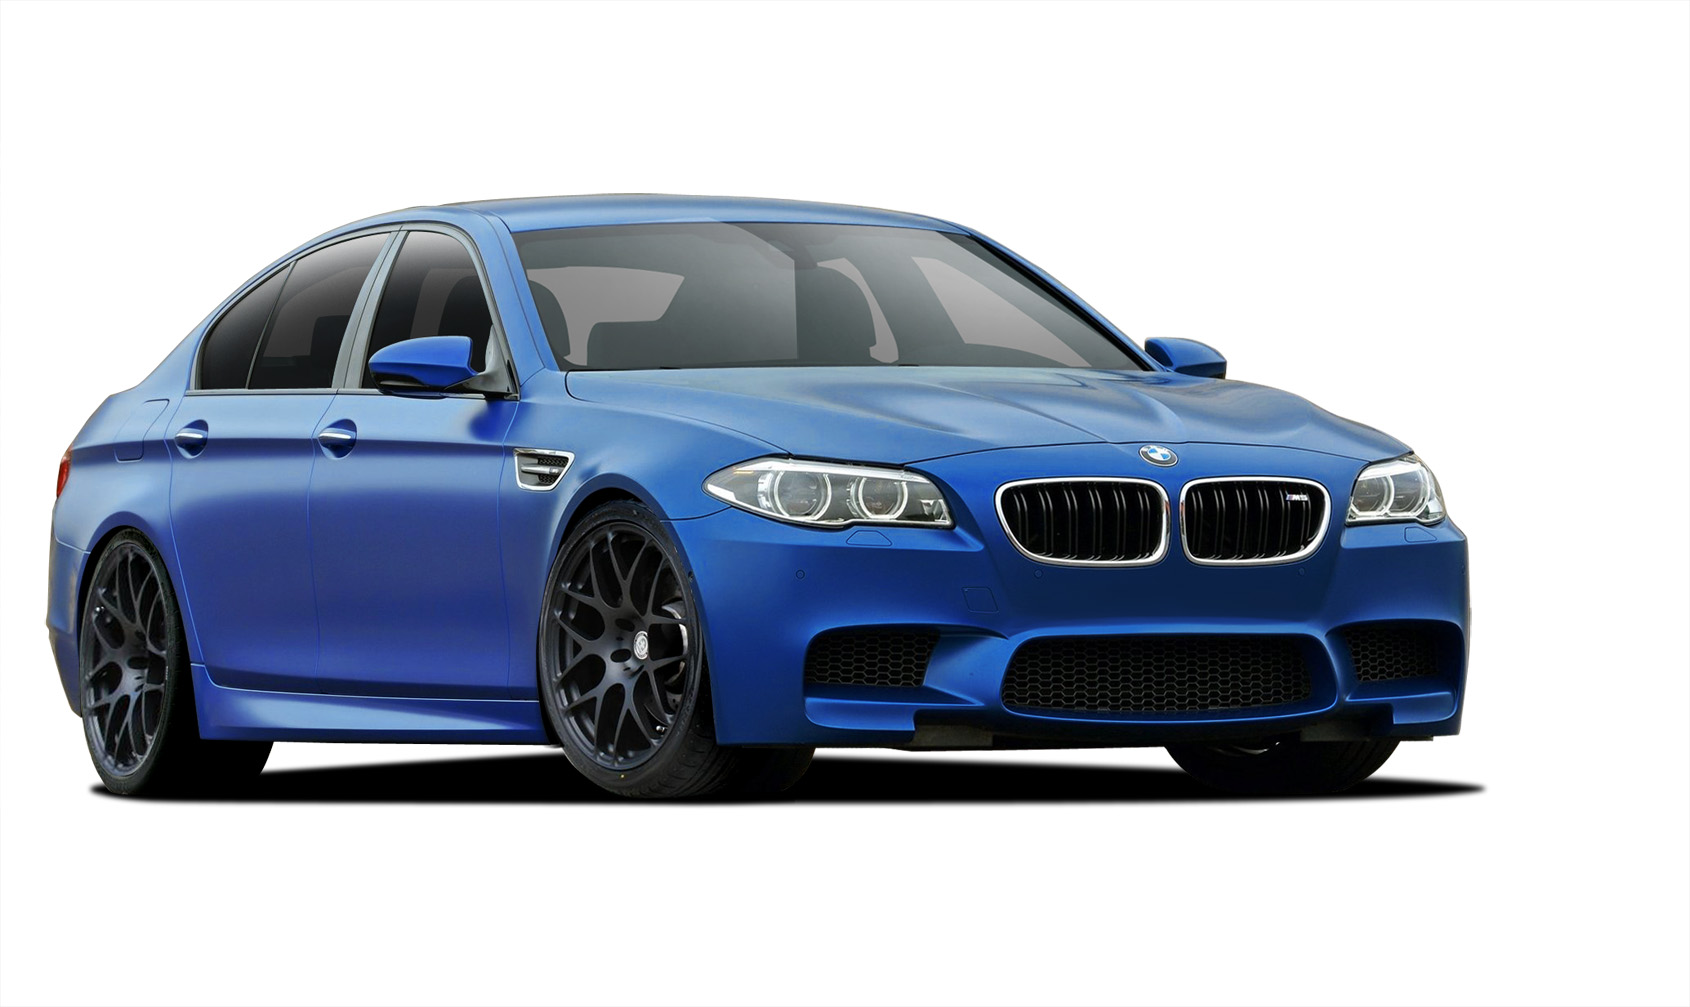 2012 BMW 5 Series 4DR - Polypropylene Body Kit Bodykit - BMW 5 Series F10 Vaero M5 Look Conversion Kit ( with PDC , with Washer , with Camera ) - 6 Pi